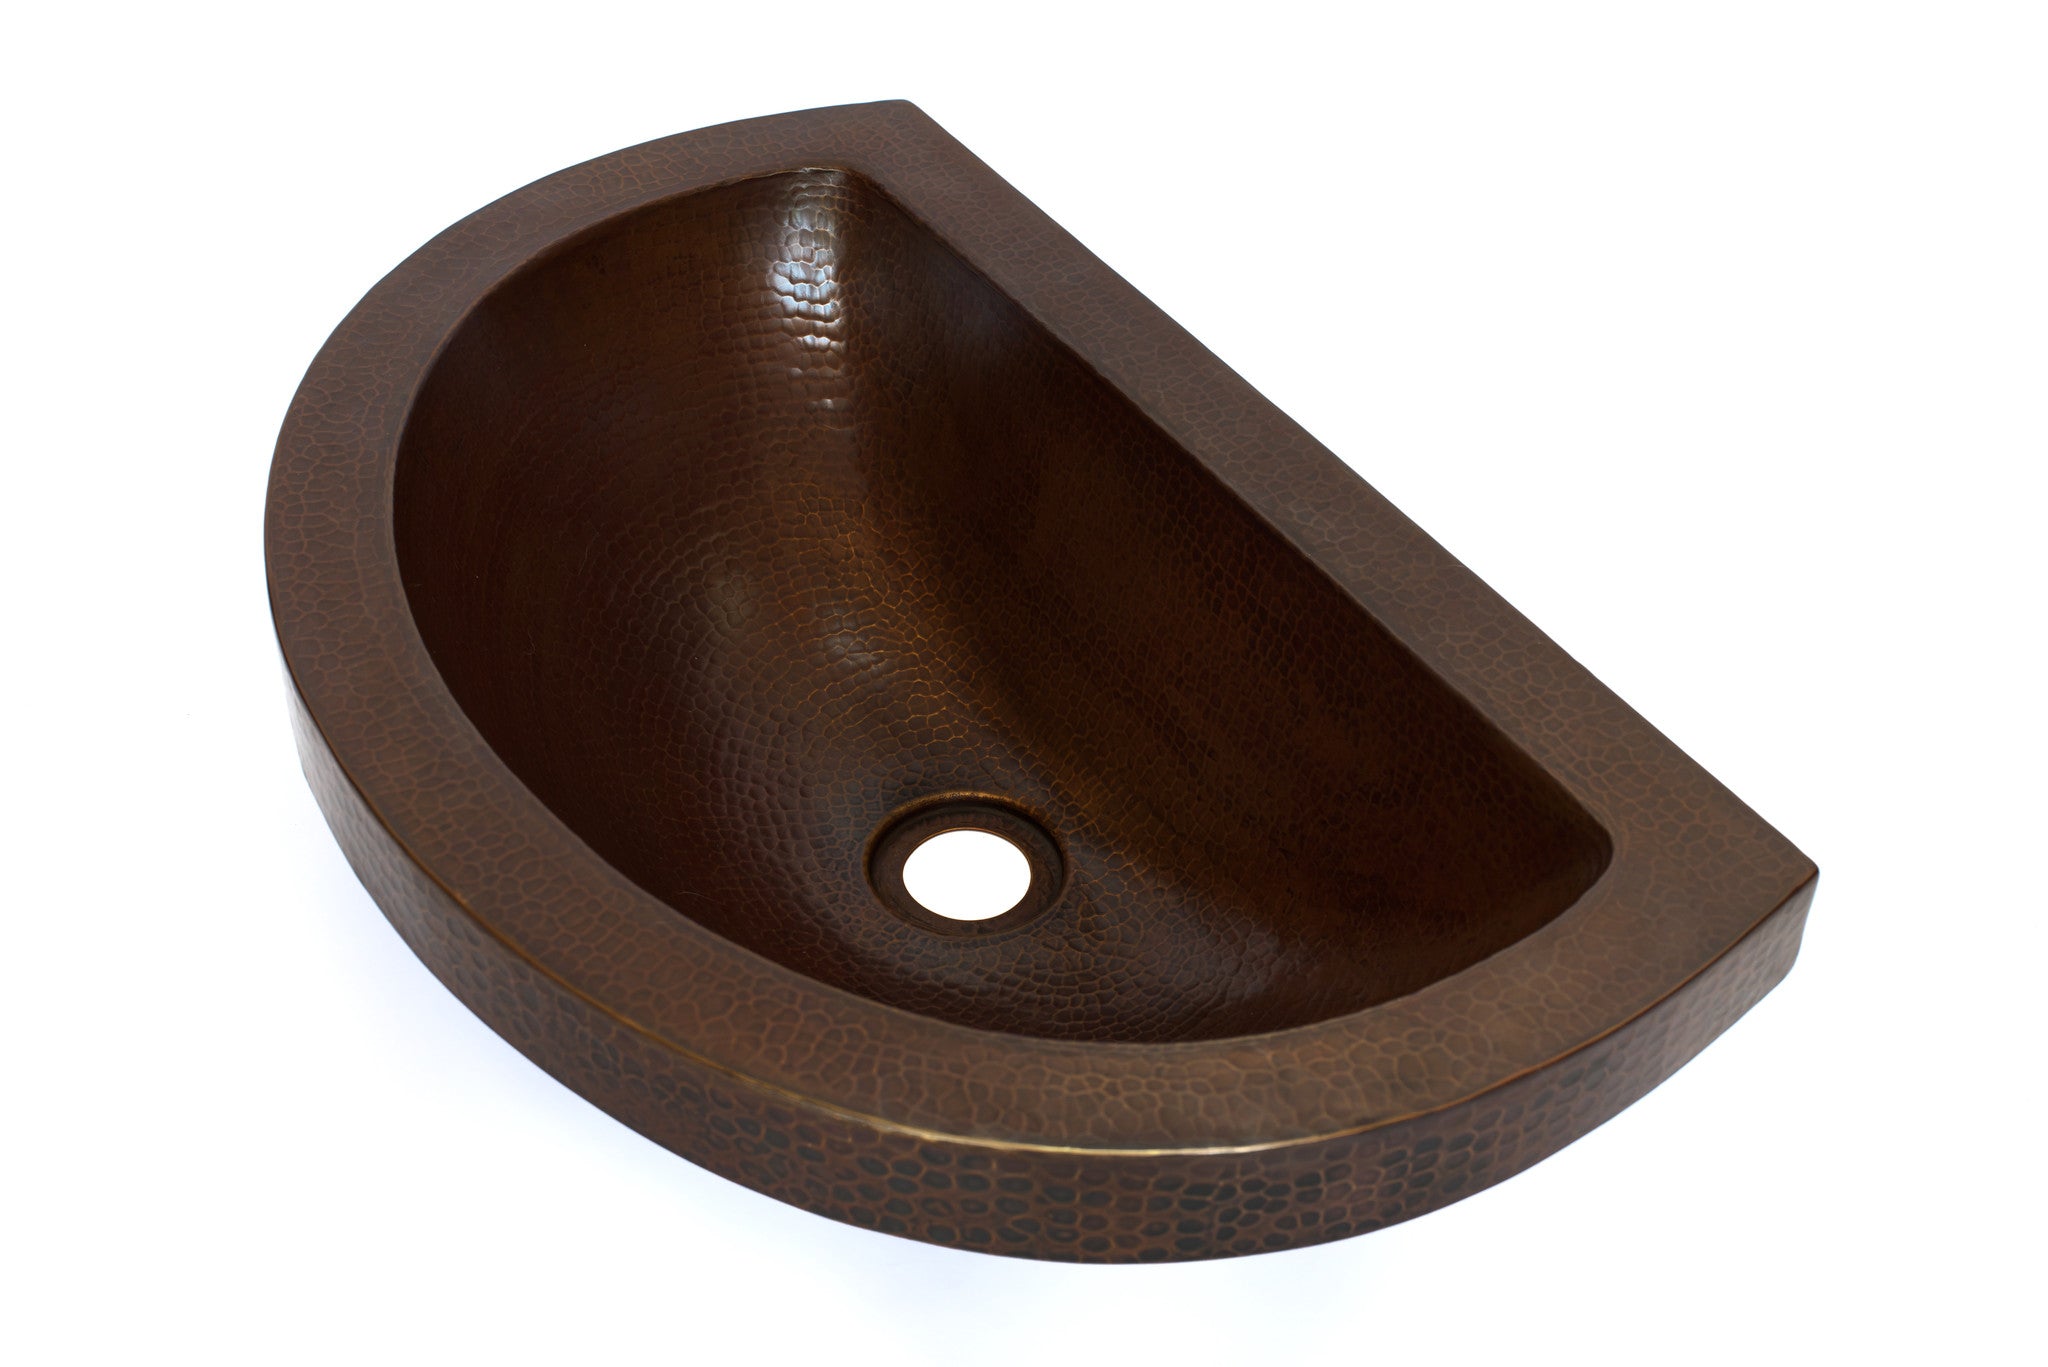 Oval Raised Profile Bathroom Copper Sink with 1 5" Apron and Flat